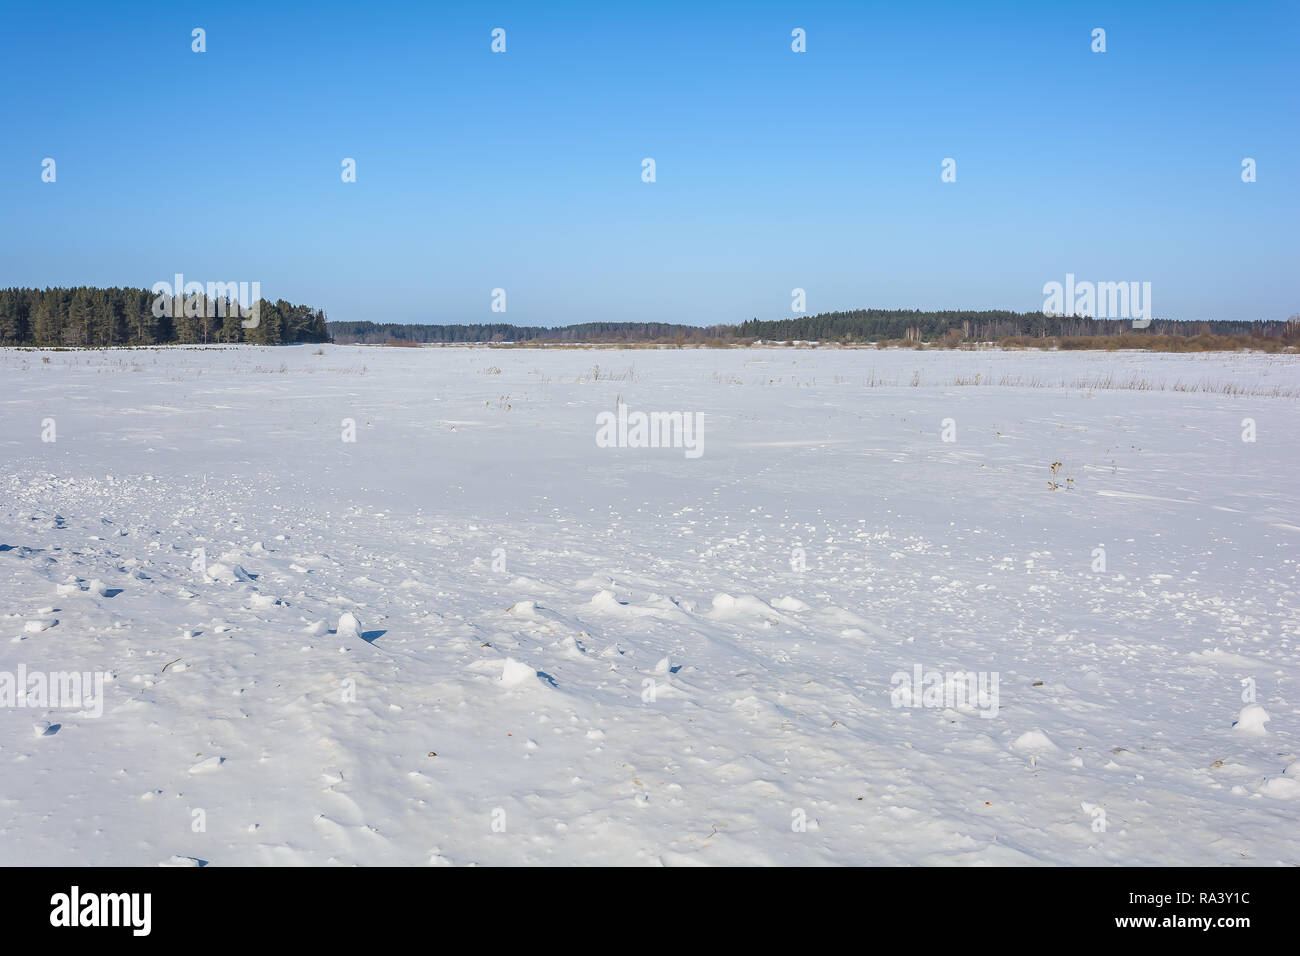 Snow-covered field near the forest in winter Stock Photo